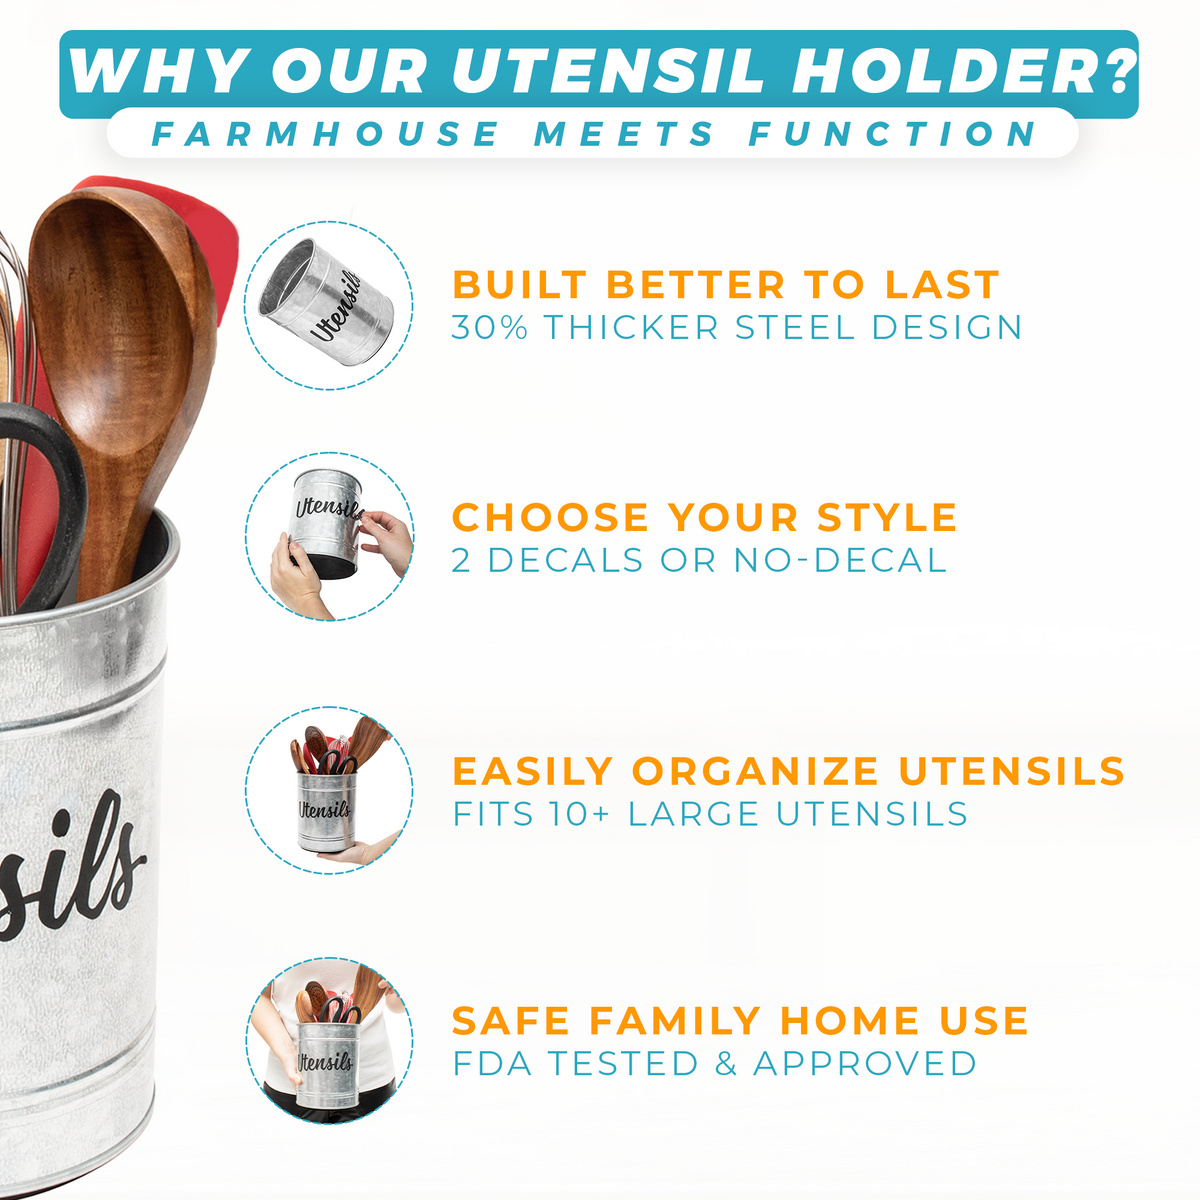 Utensil holder with features that meets function